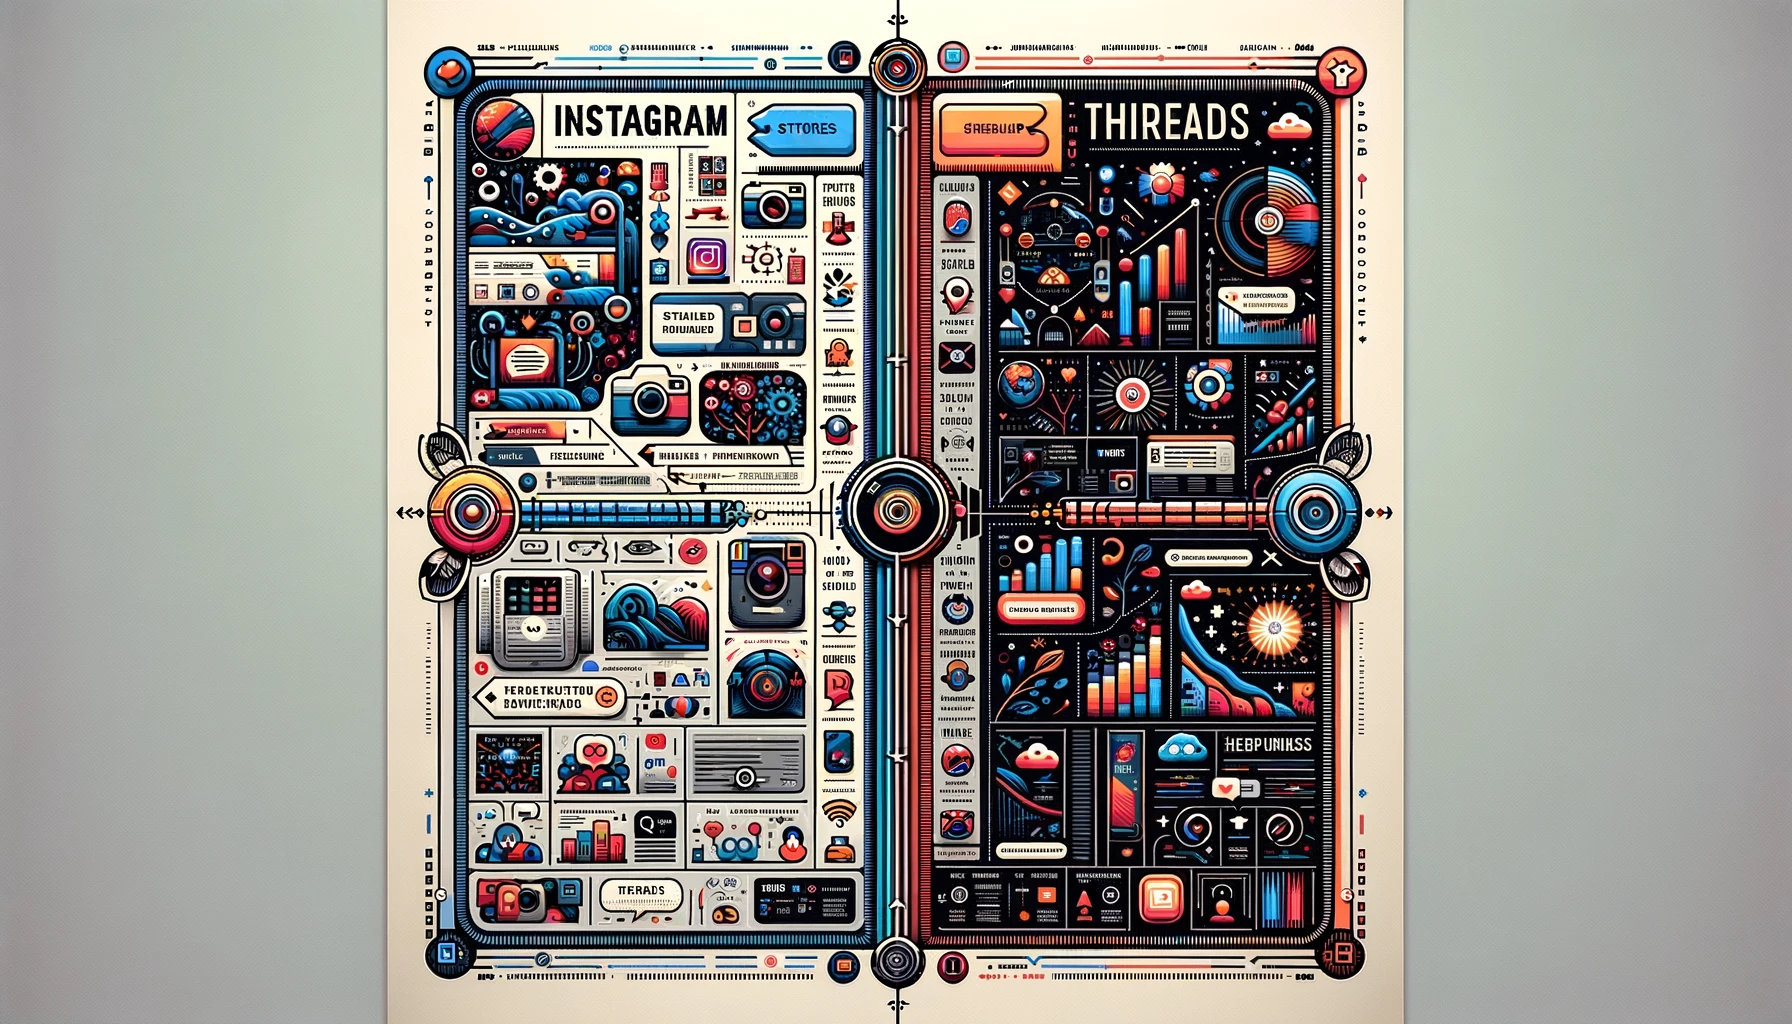 Instagram-vs-Threads-Comparison-of-Key-Features